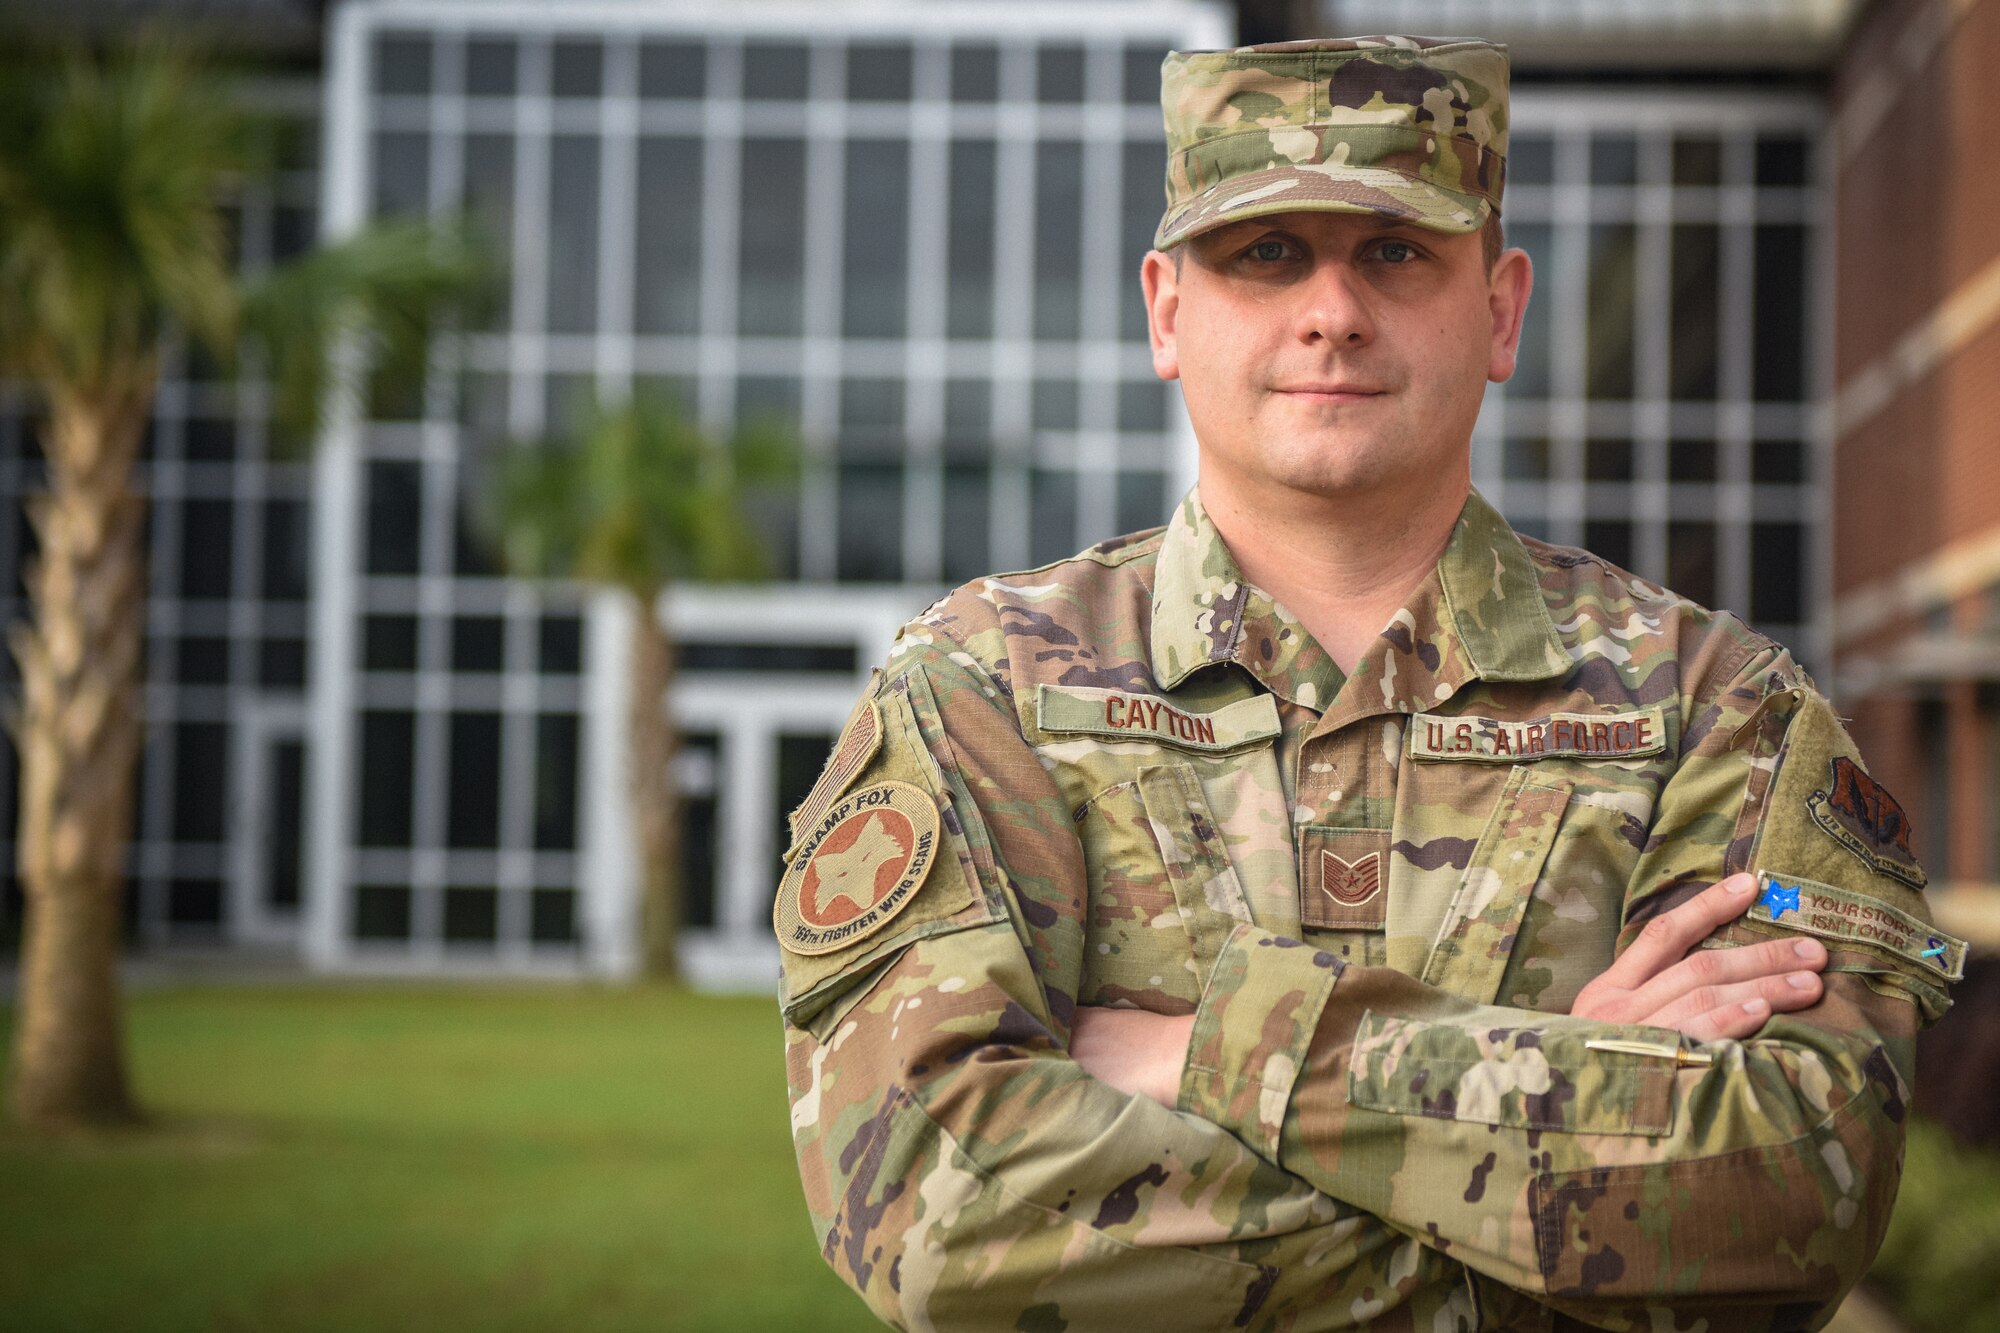 U.S. Air Force Tech. Sgt. Justin Cayton, a production recruiter for the 169th Fighter Wing, poses for a portrait in front of the Joint Armed Forces Reserve Center at McEntire Joint National Guard Base on August 18, 2020. Cayton is an Air National Guard recruiter charged with guiding potential recruits and applicants throughout their enlistment journey into the South Carolina Air National Guard. (U.S. Air National Guard photo by Senior Airman Mackenzie Bacalzo, 169th Fighter Wing Public Affairs)